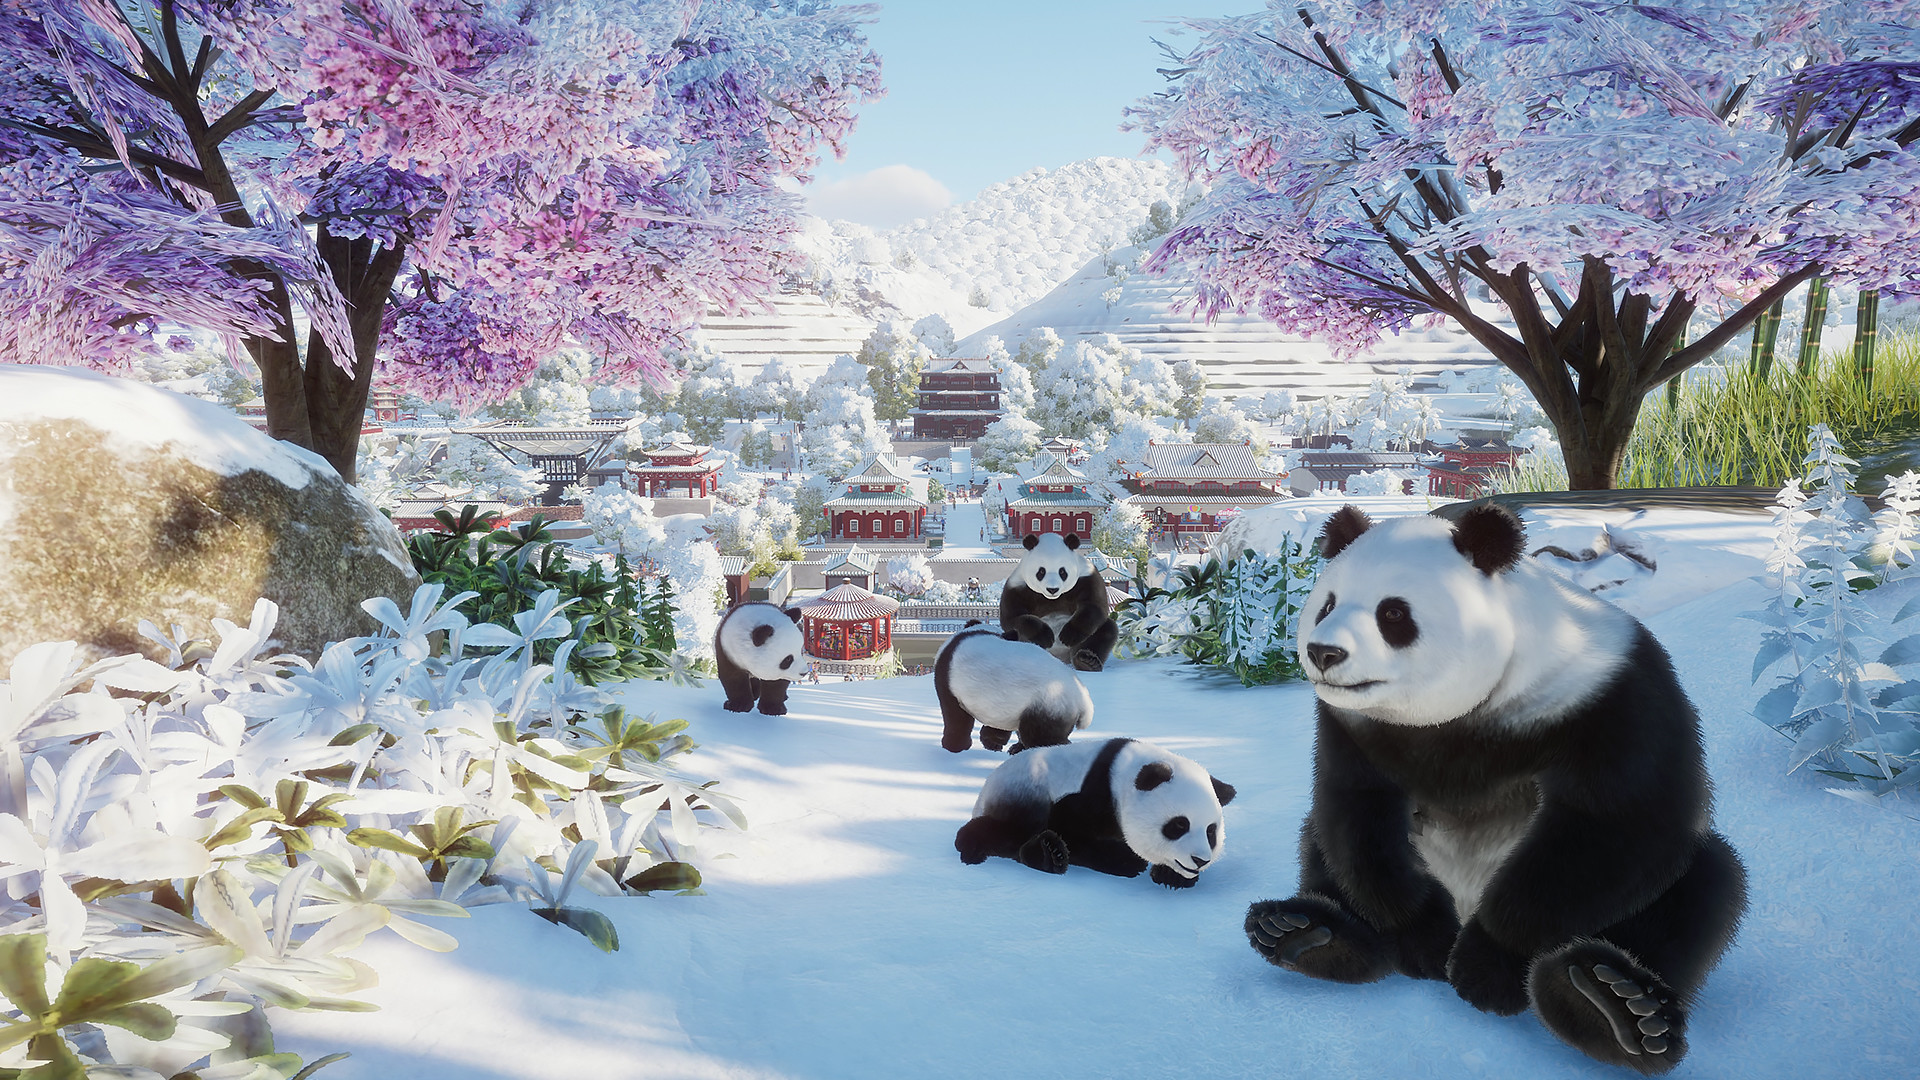 Planet Zoo Free Download